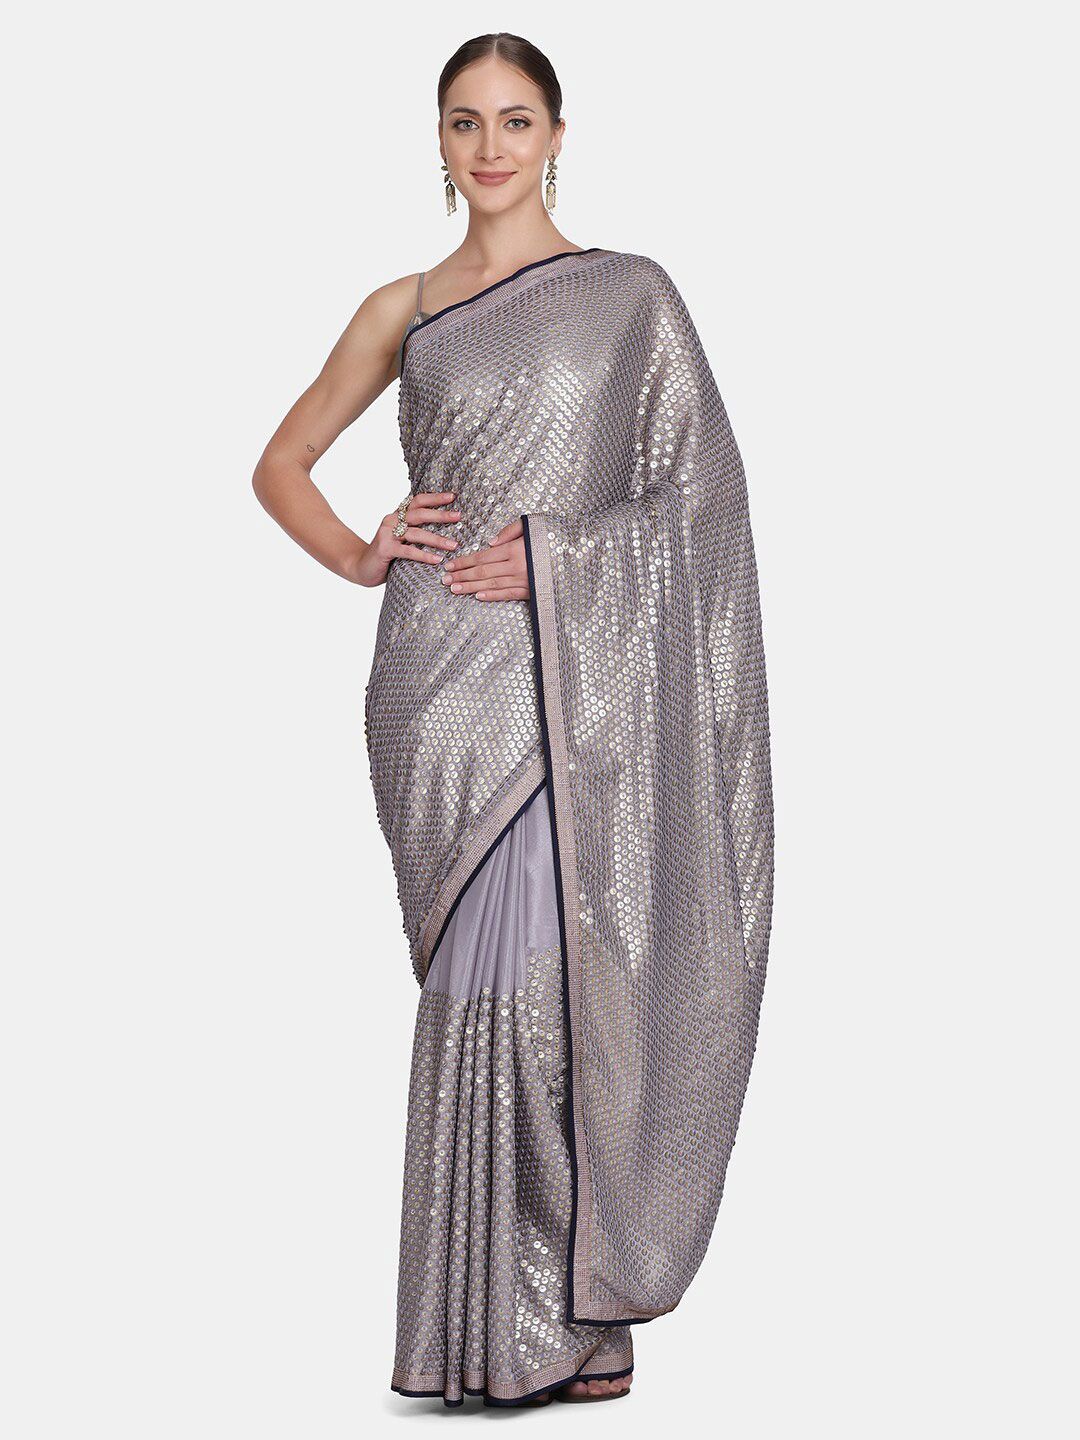 BOMBAY SELECTIONS Grey Embellished Beads and Stones Satin Saree Price in India